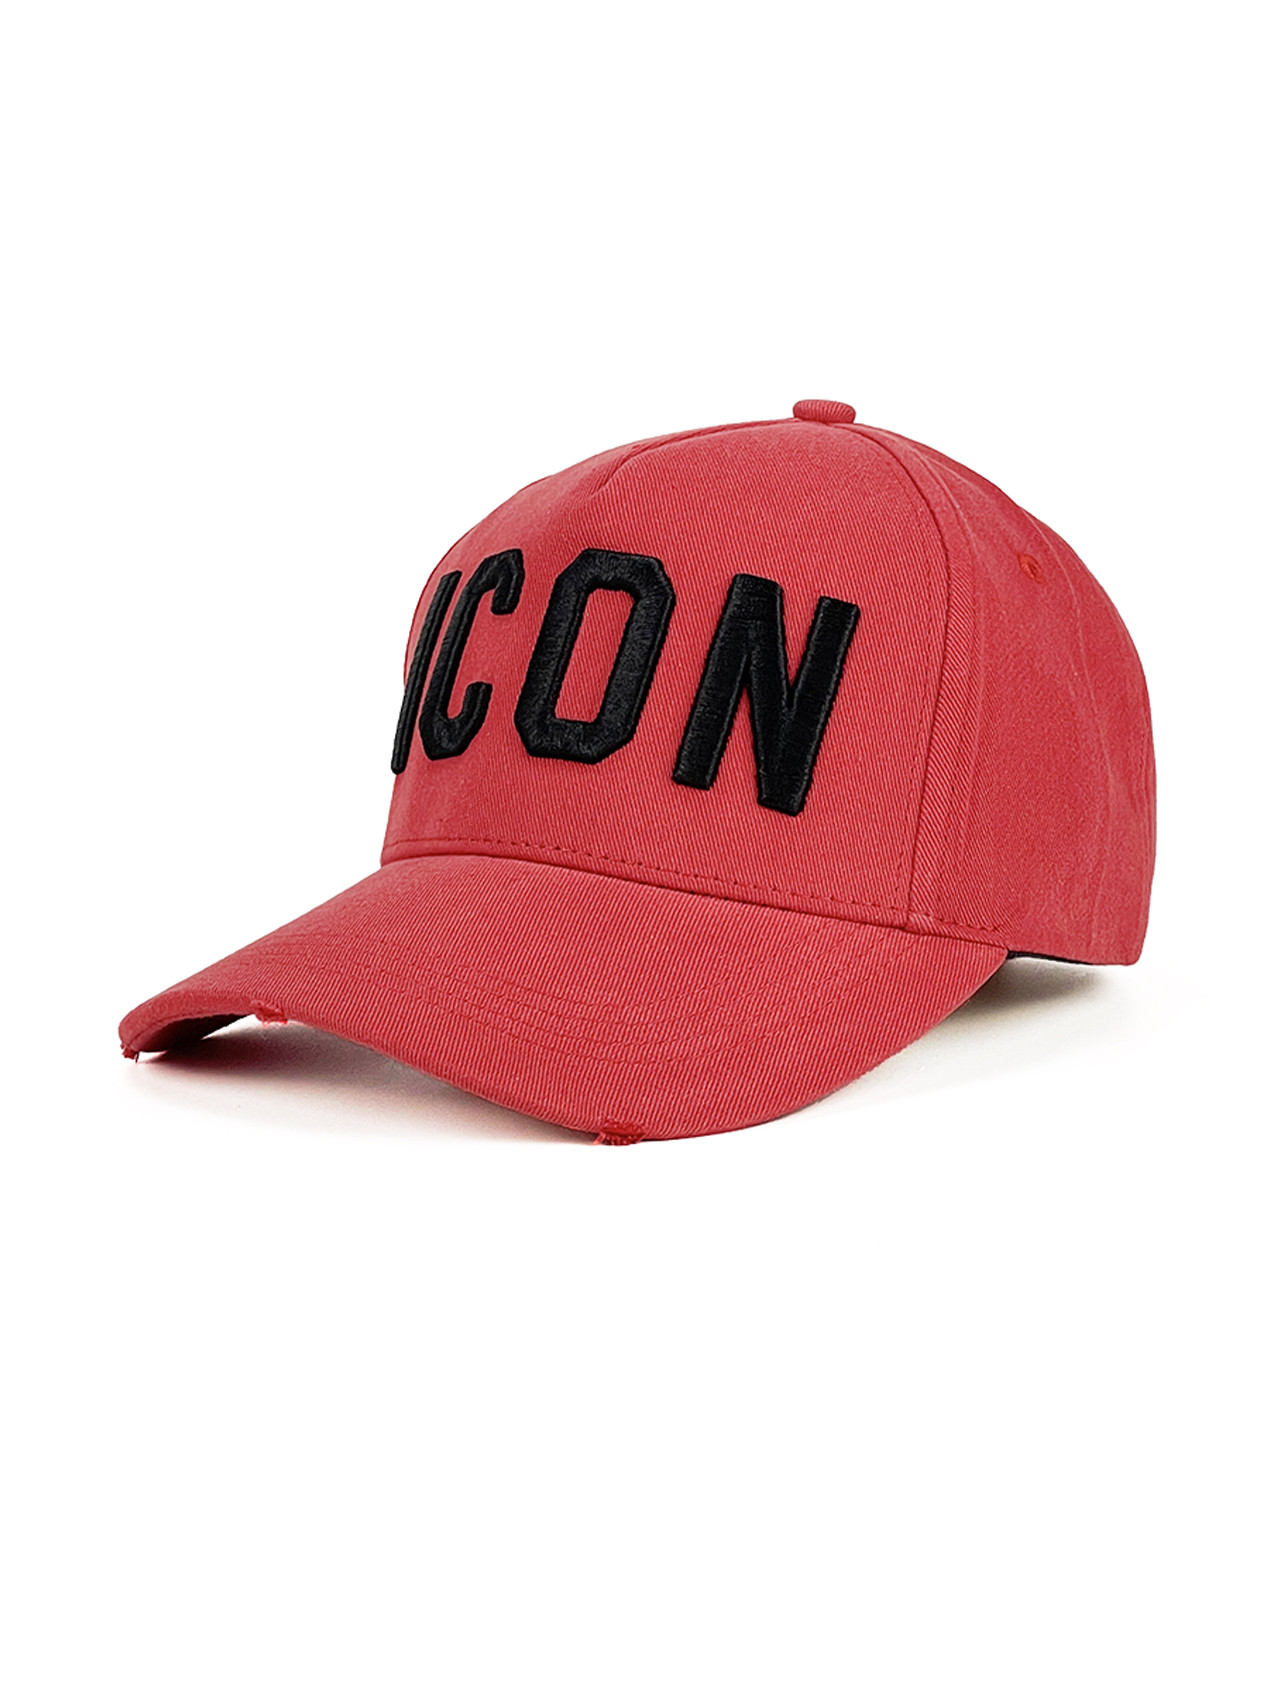 Casquette LILAY, Rouge